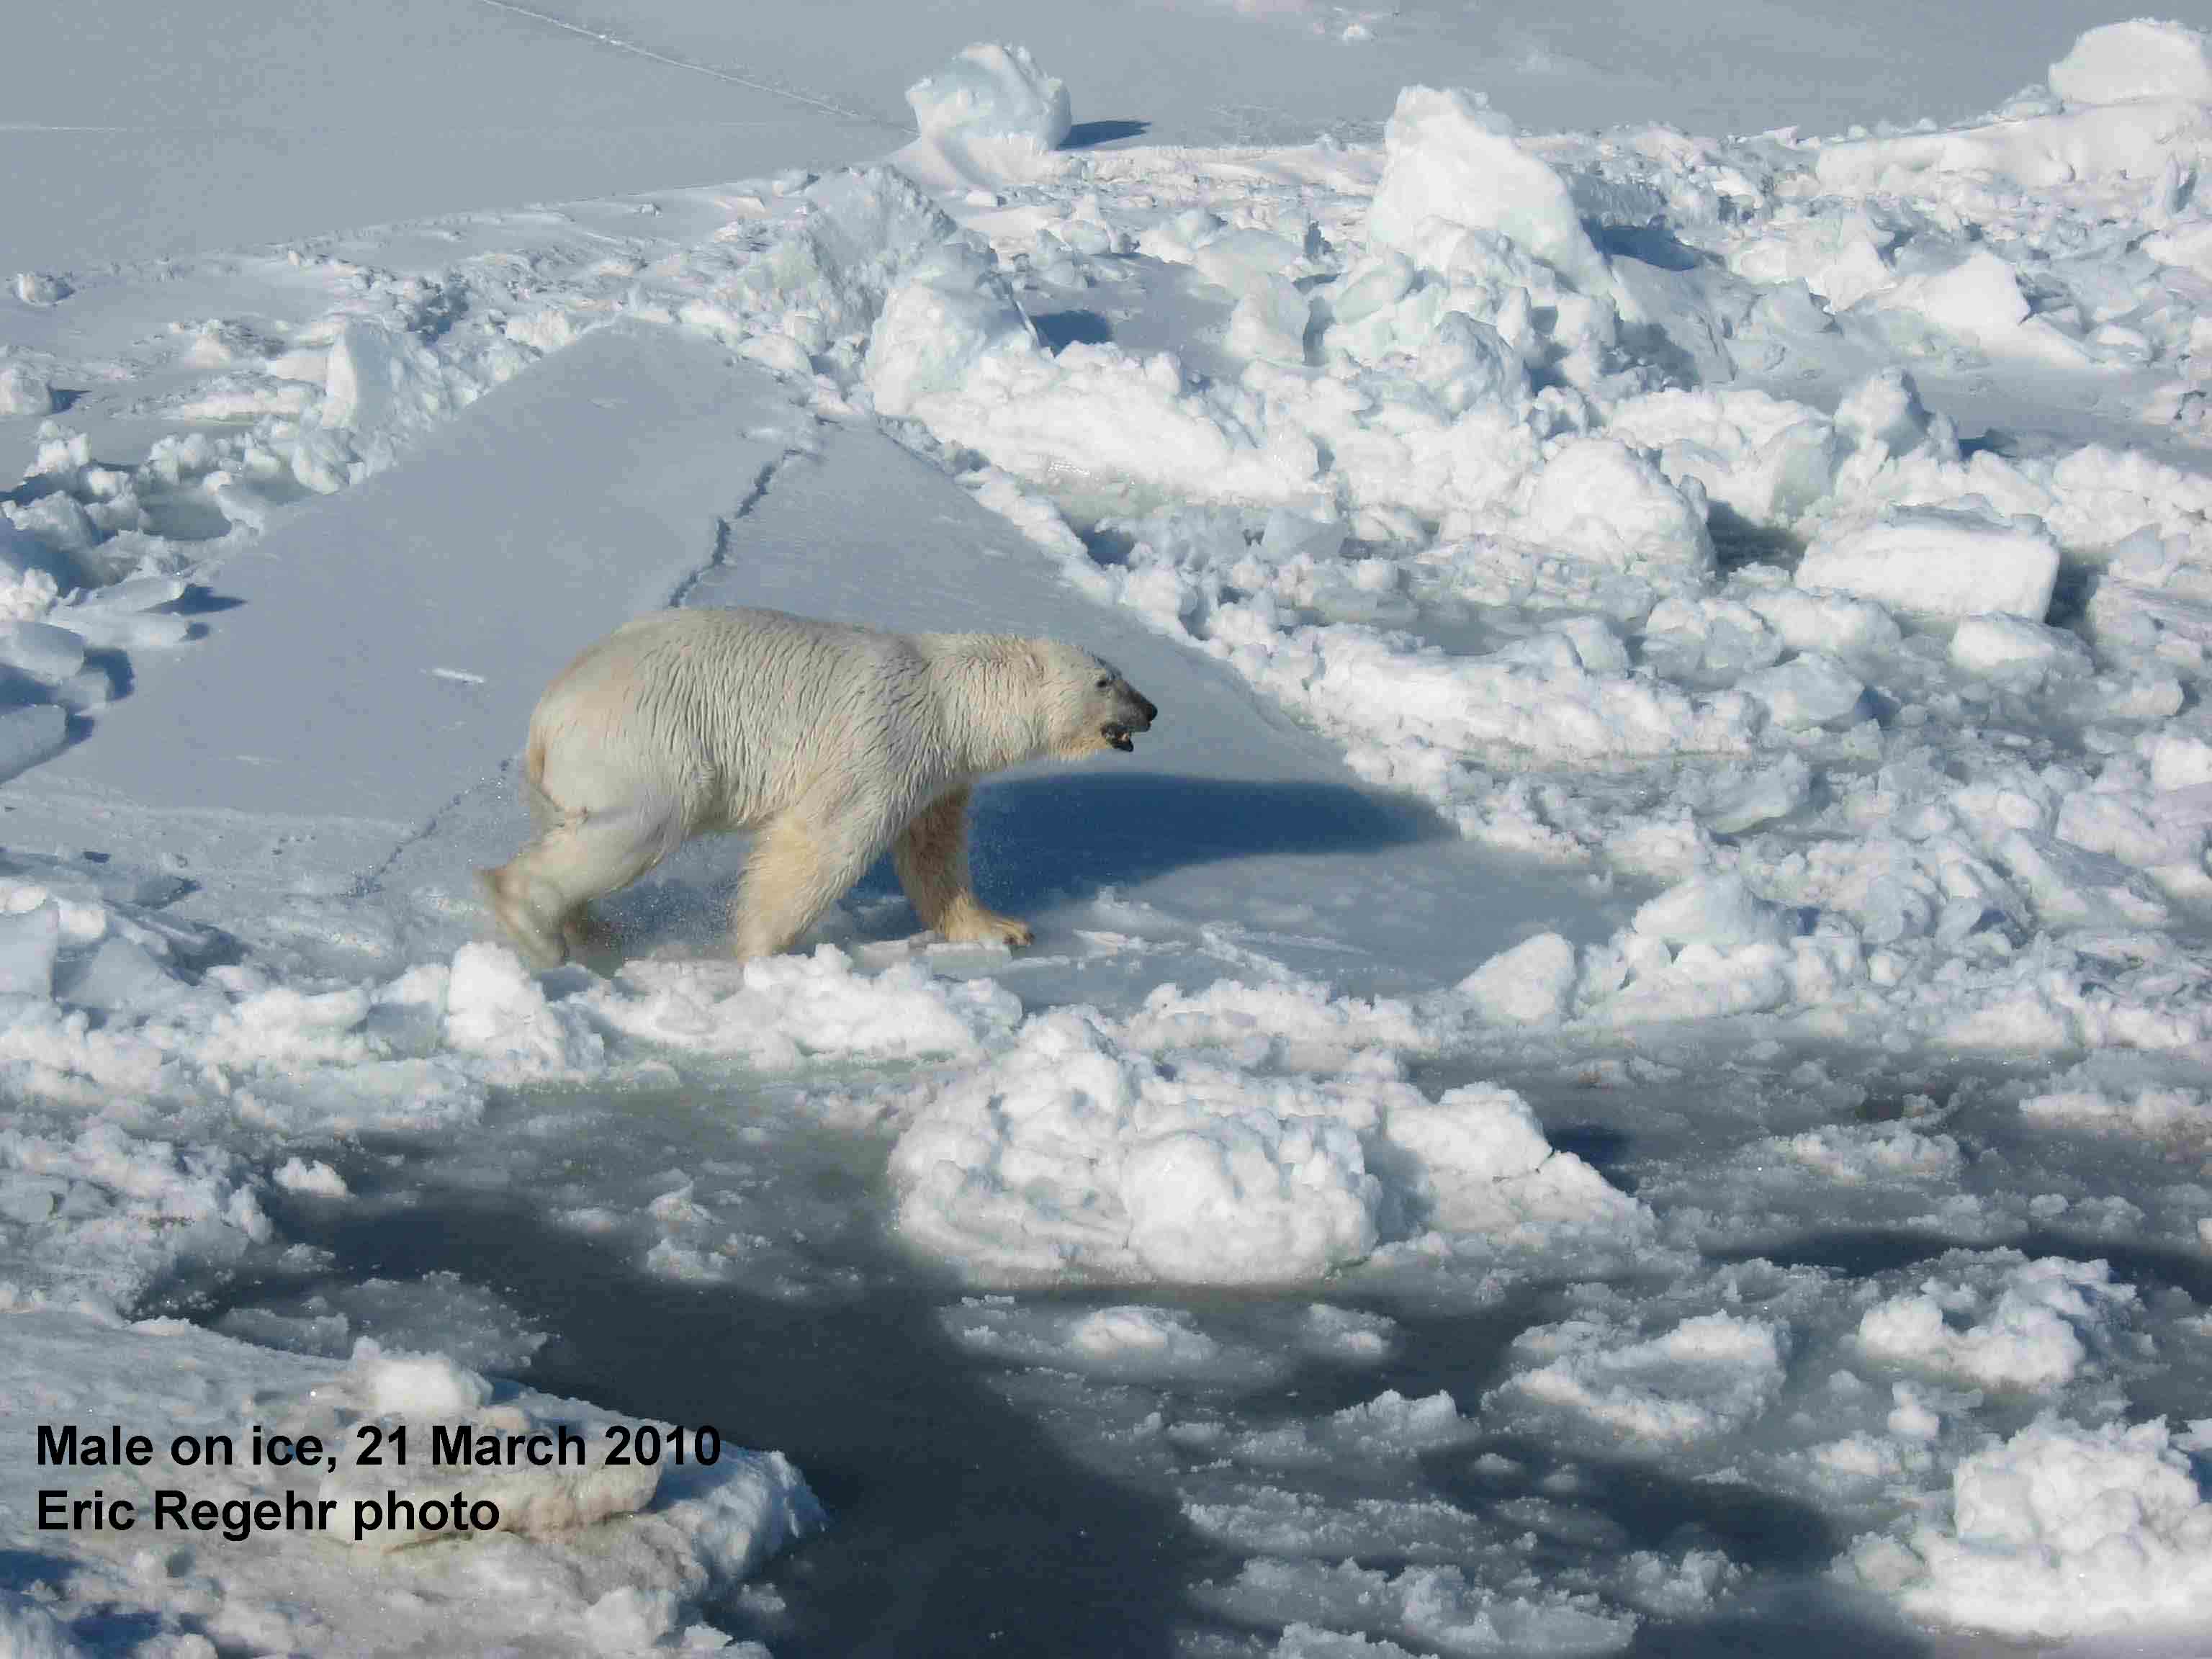 spring ice conditions | polarbearscience